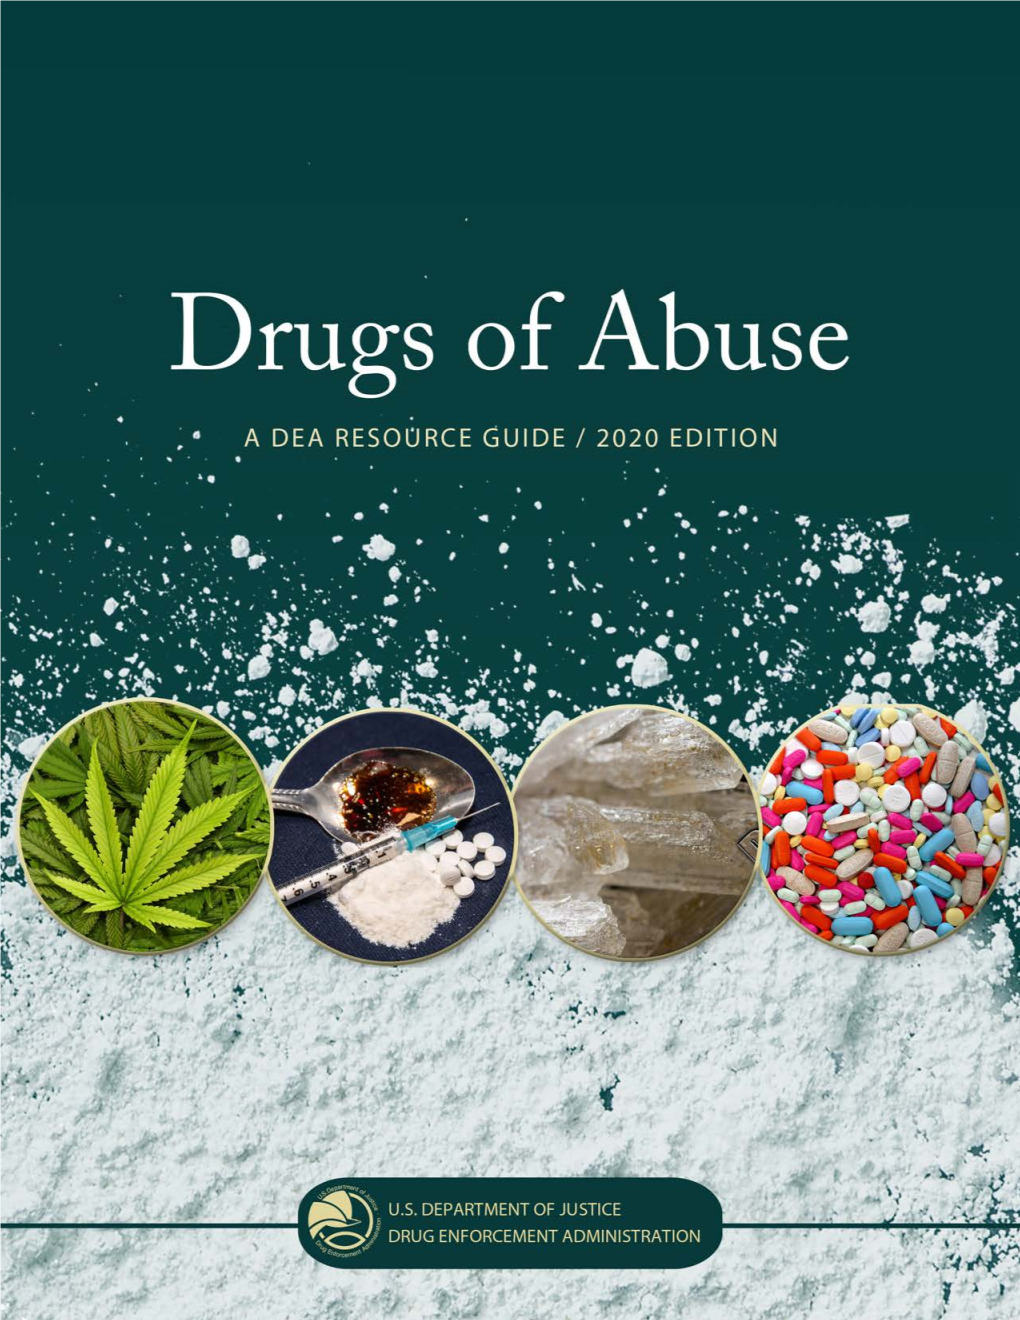 Drugs of Abuse, a DEA Resource Guide (2020 Edition)